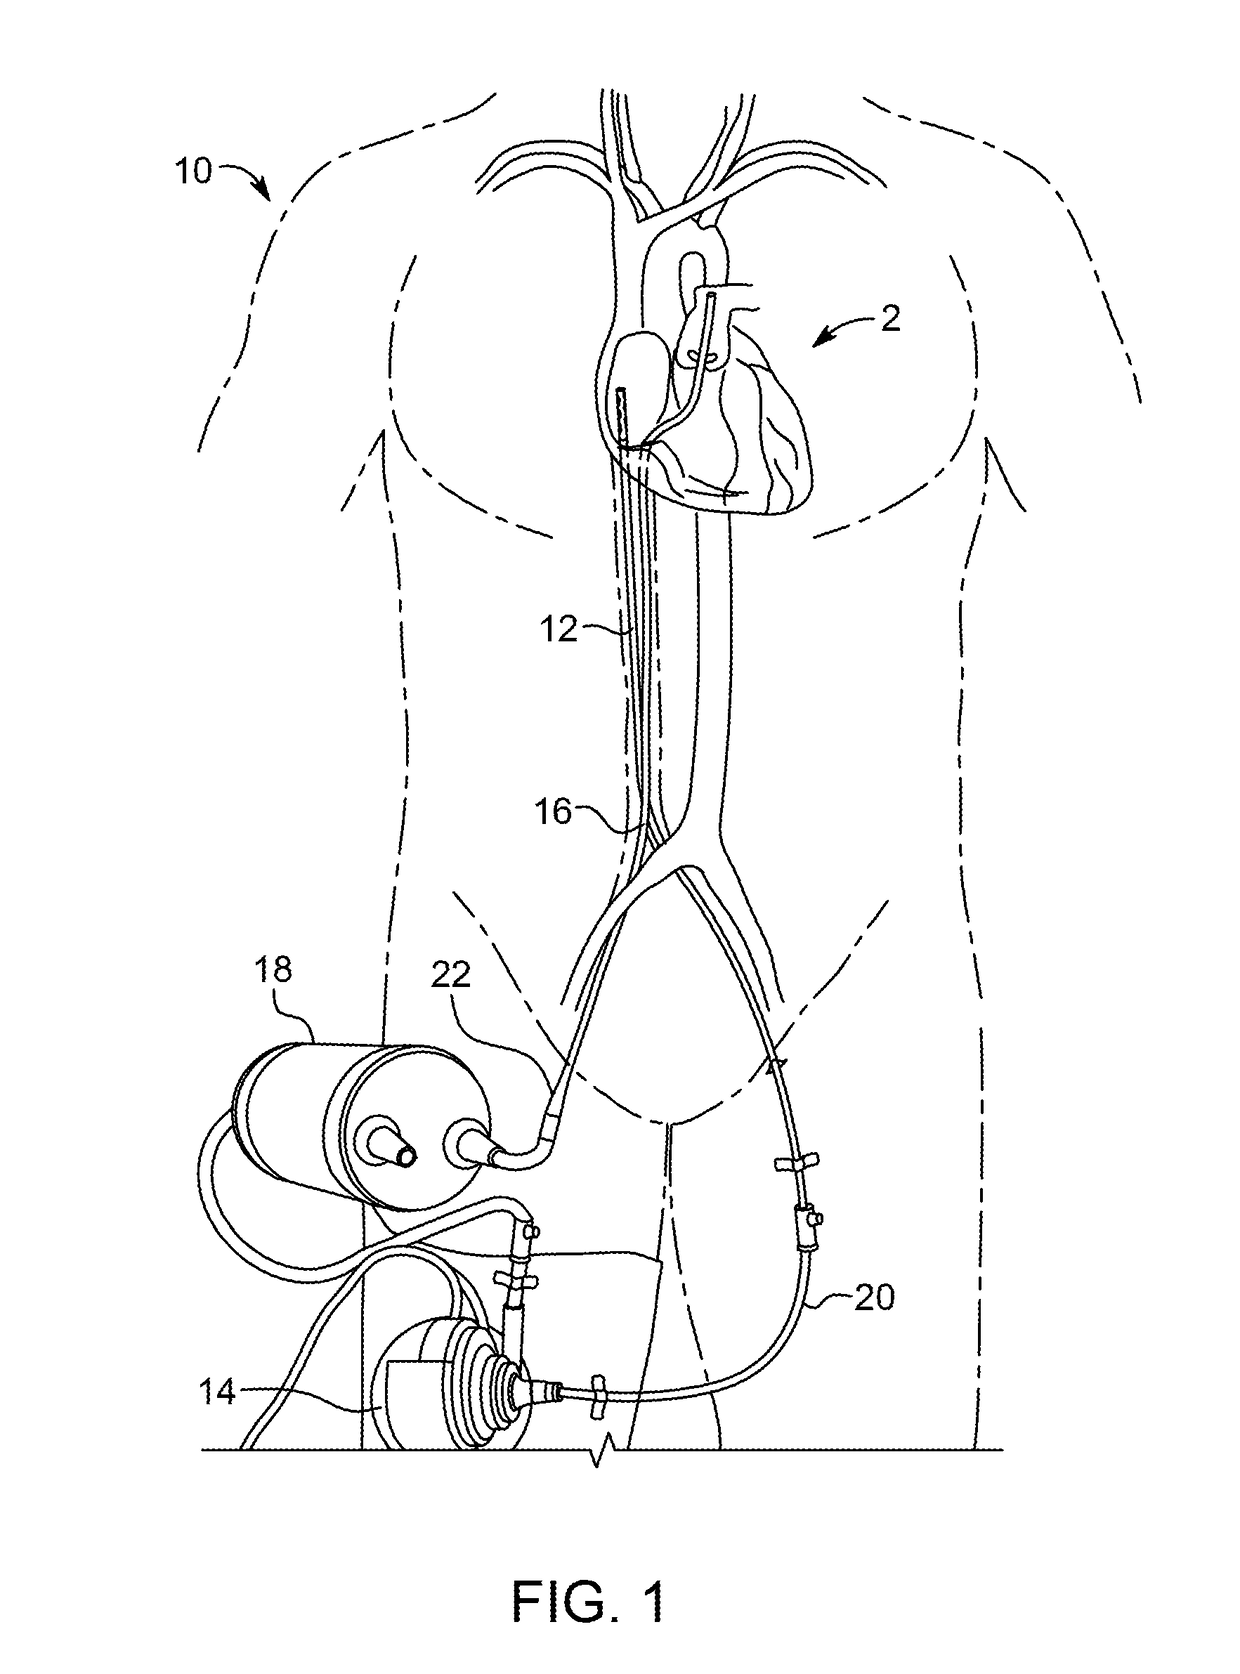 Cannula System with Sterile Connector, Blood Pump, and Patient Harness